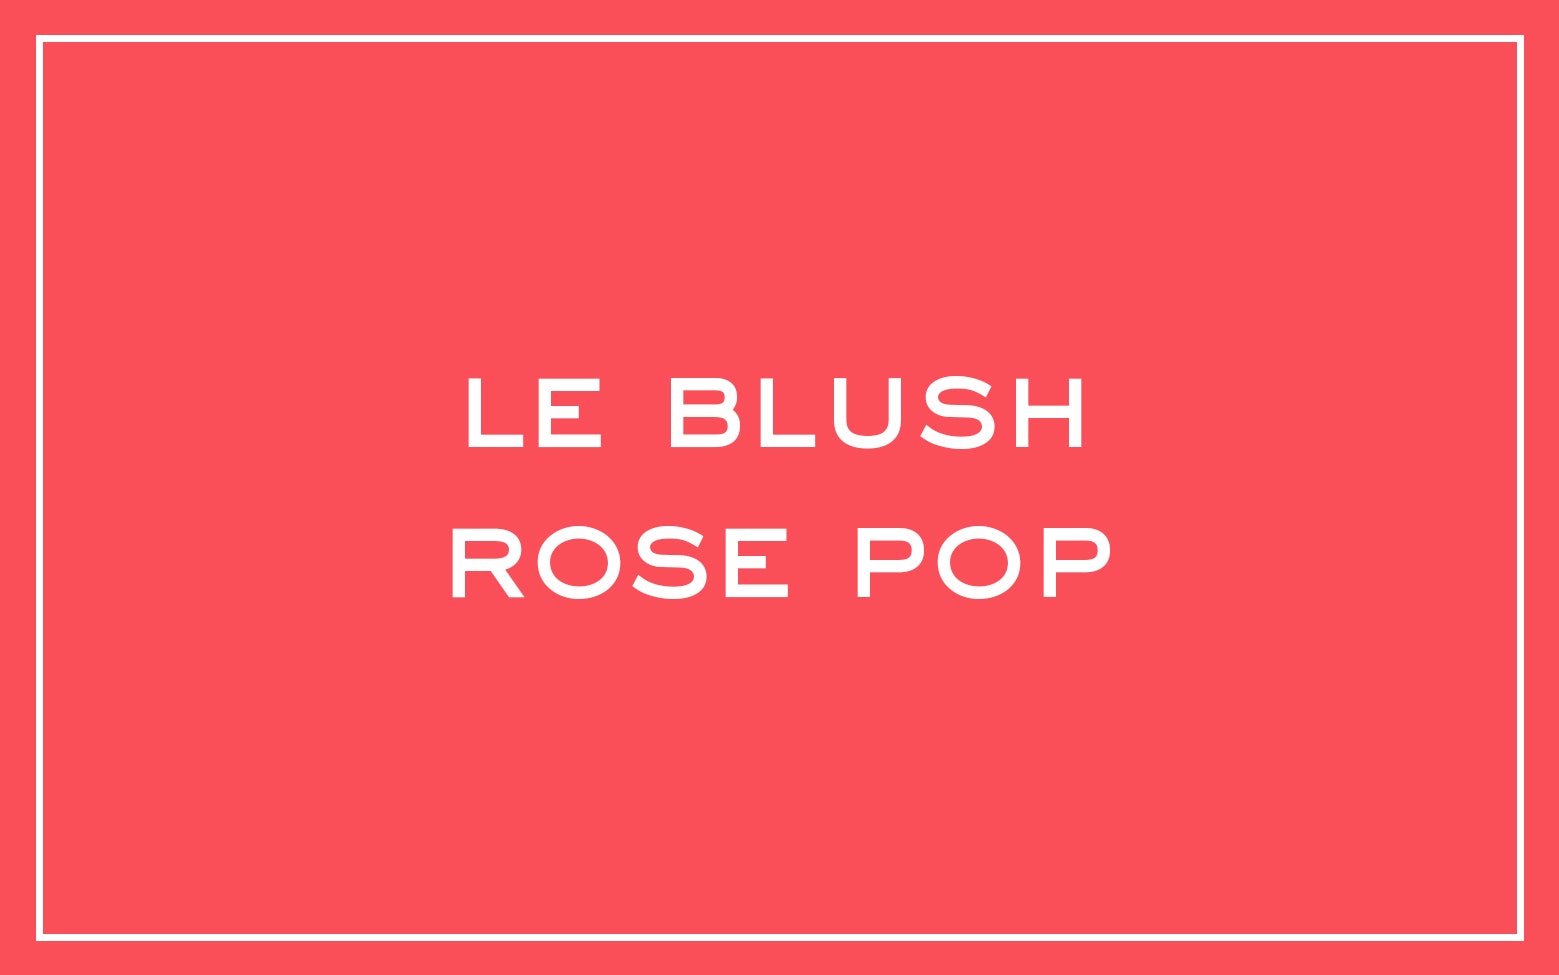 La bouche rouge The Pop Pink Blush swatch with text